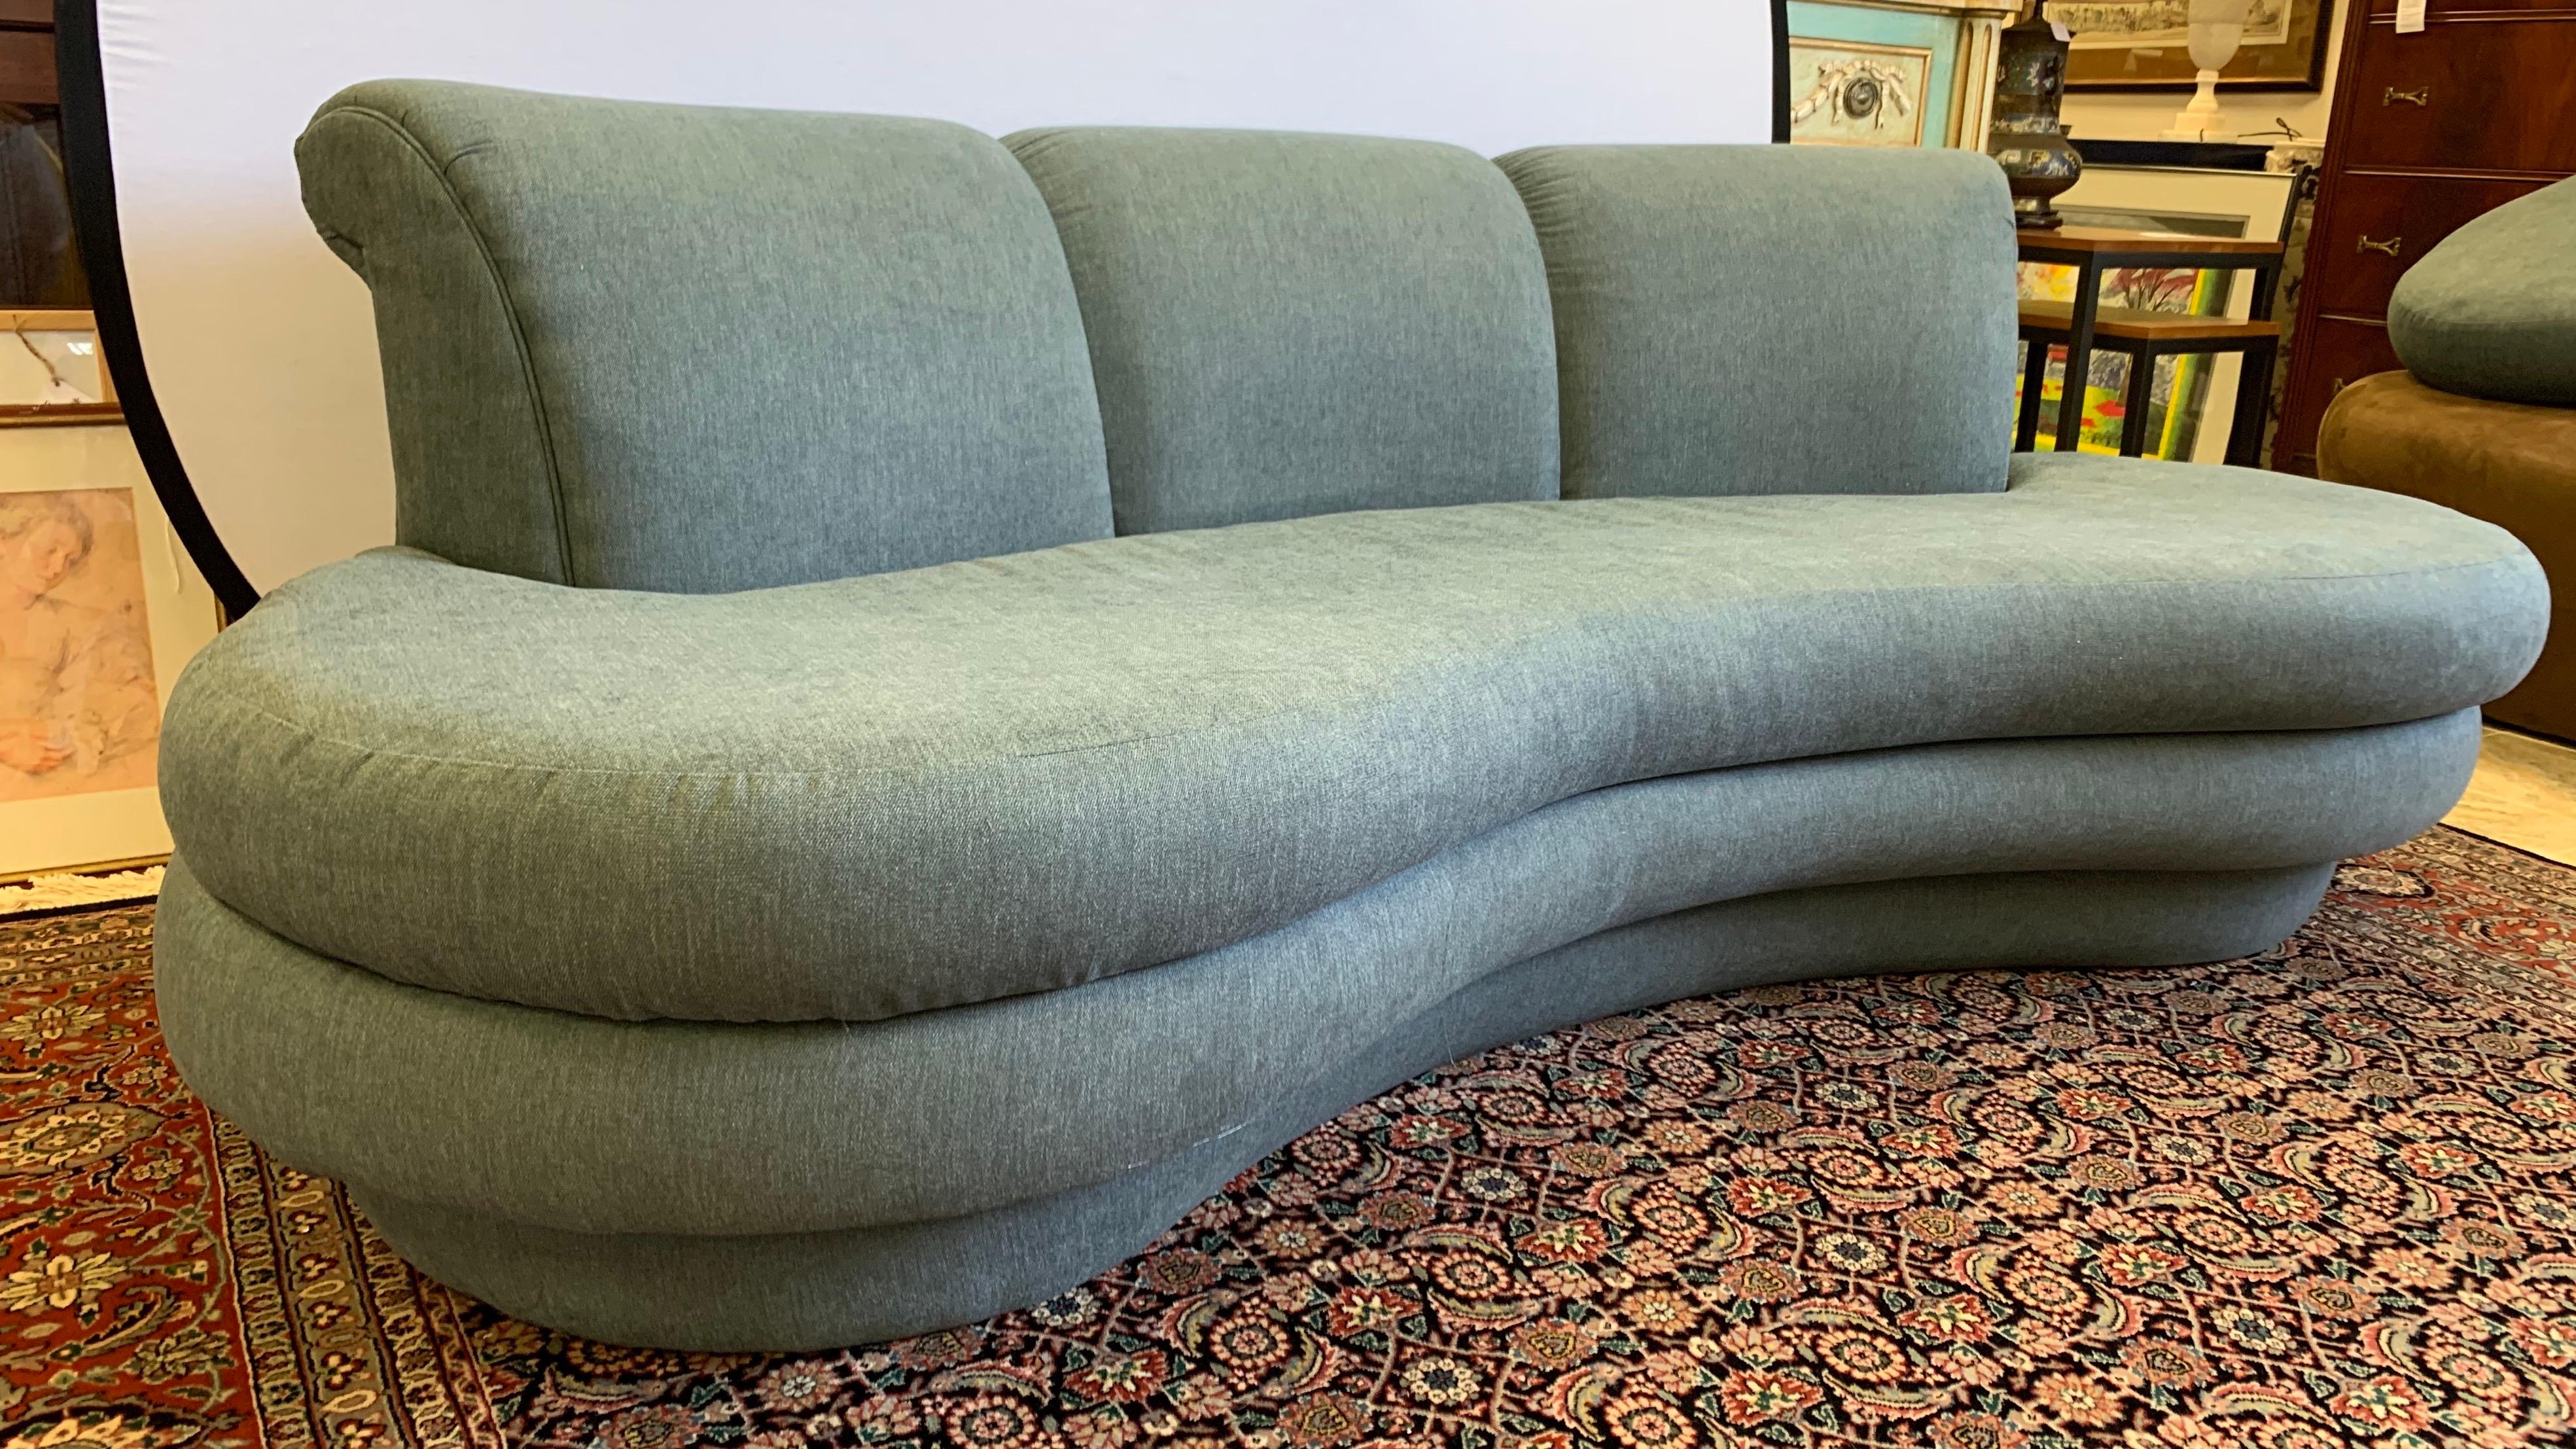 Mid-Century Modern Adrian Pearsall Cloud Sofa for Comfort Designs Newly Upholstered in Slate Gray 